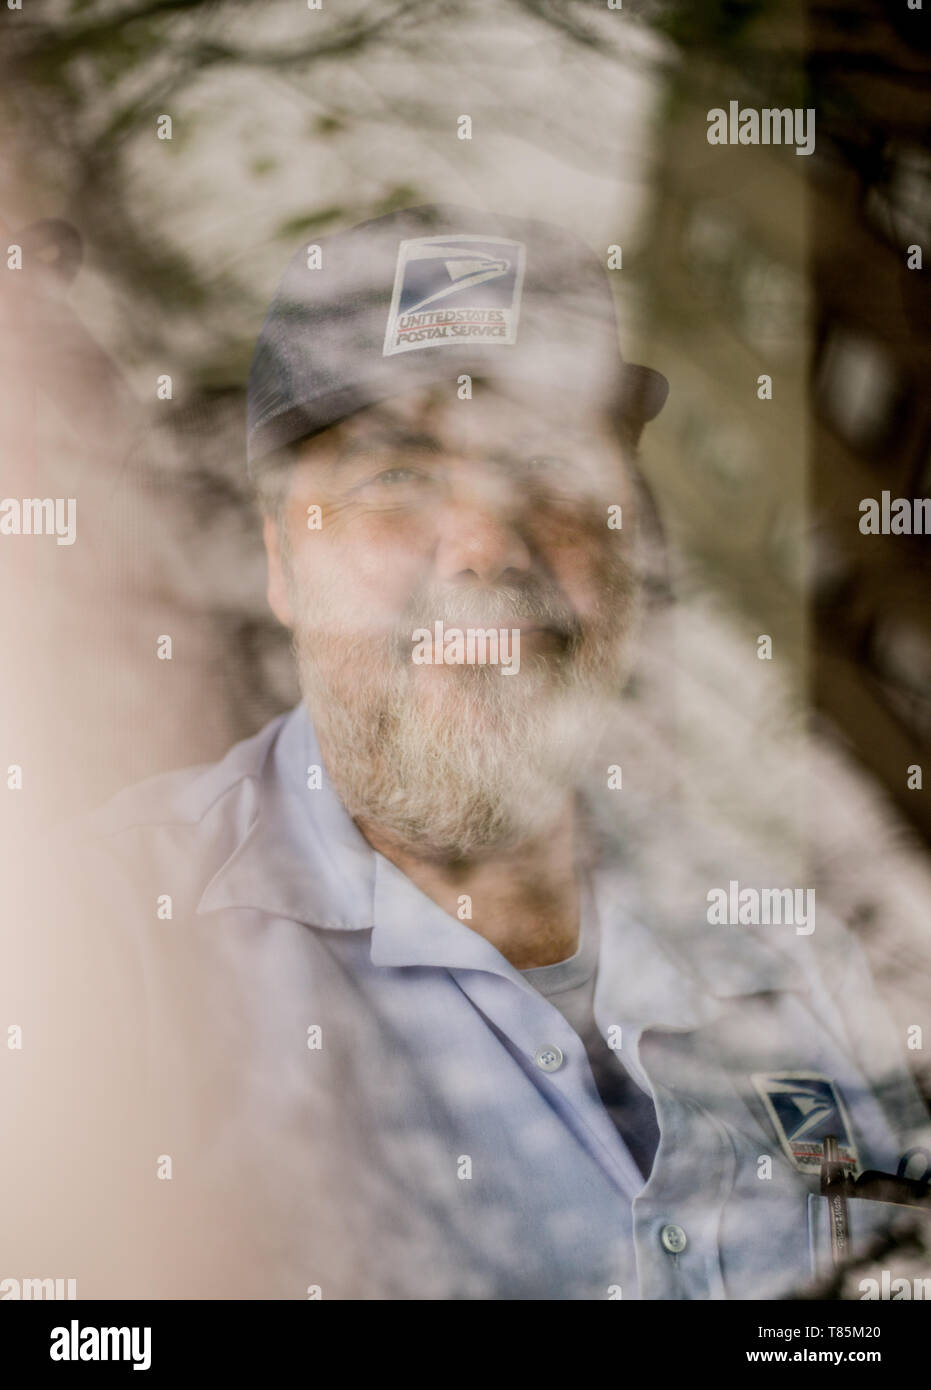 street portrait taken in Philadelphia Pennsylvania, of a United States Postal  delivery man photographed throuhg the window of his vehical Stock Photo